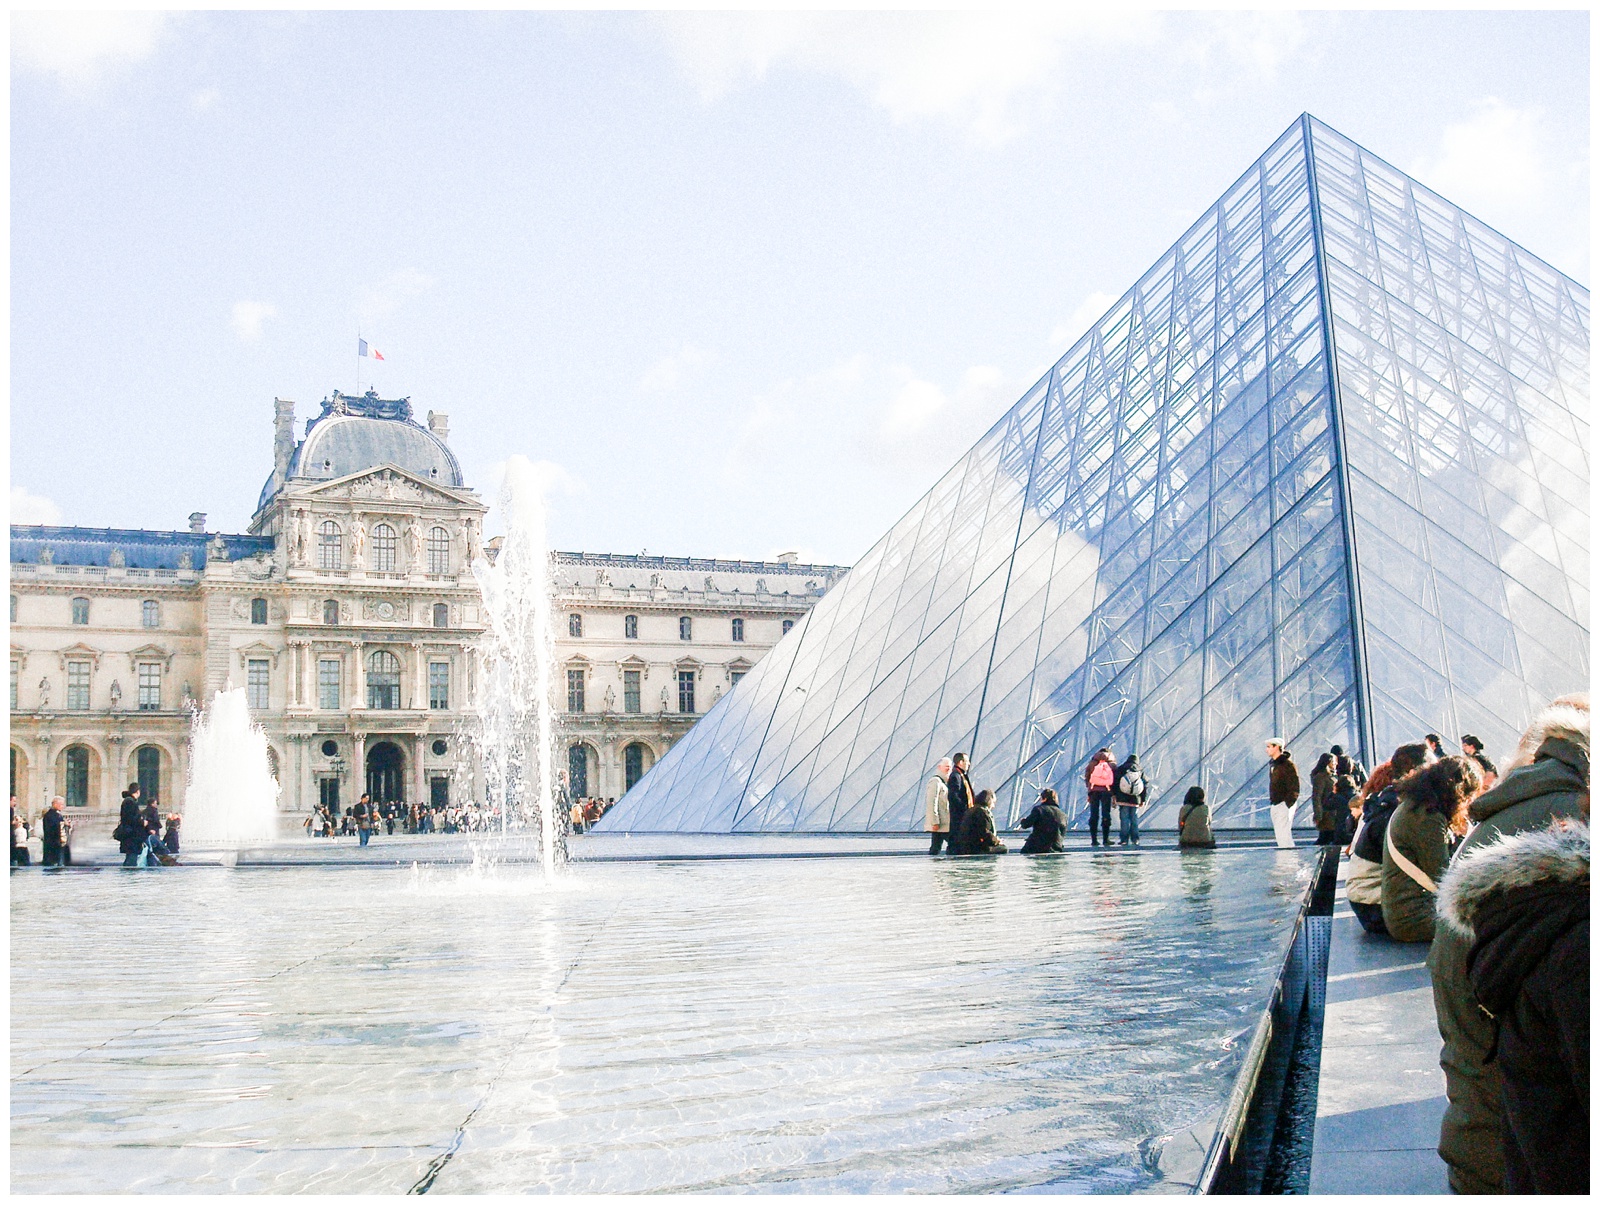 exterior of the Louvre, glass pyramid, Paris, France